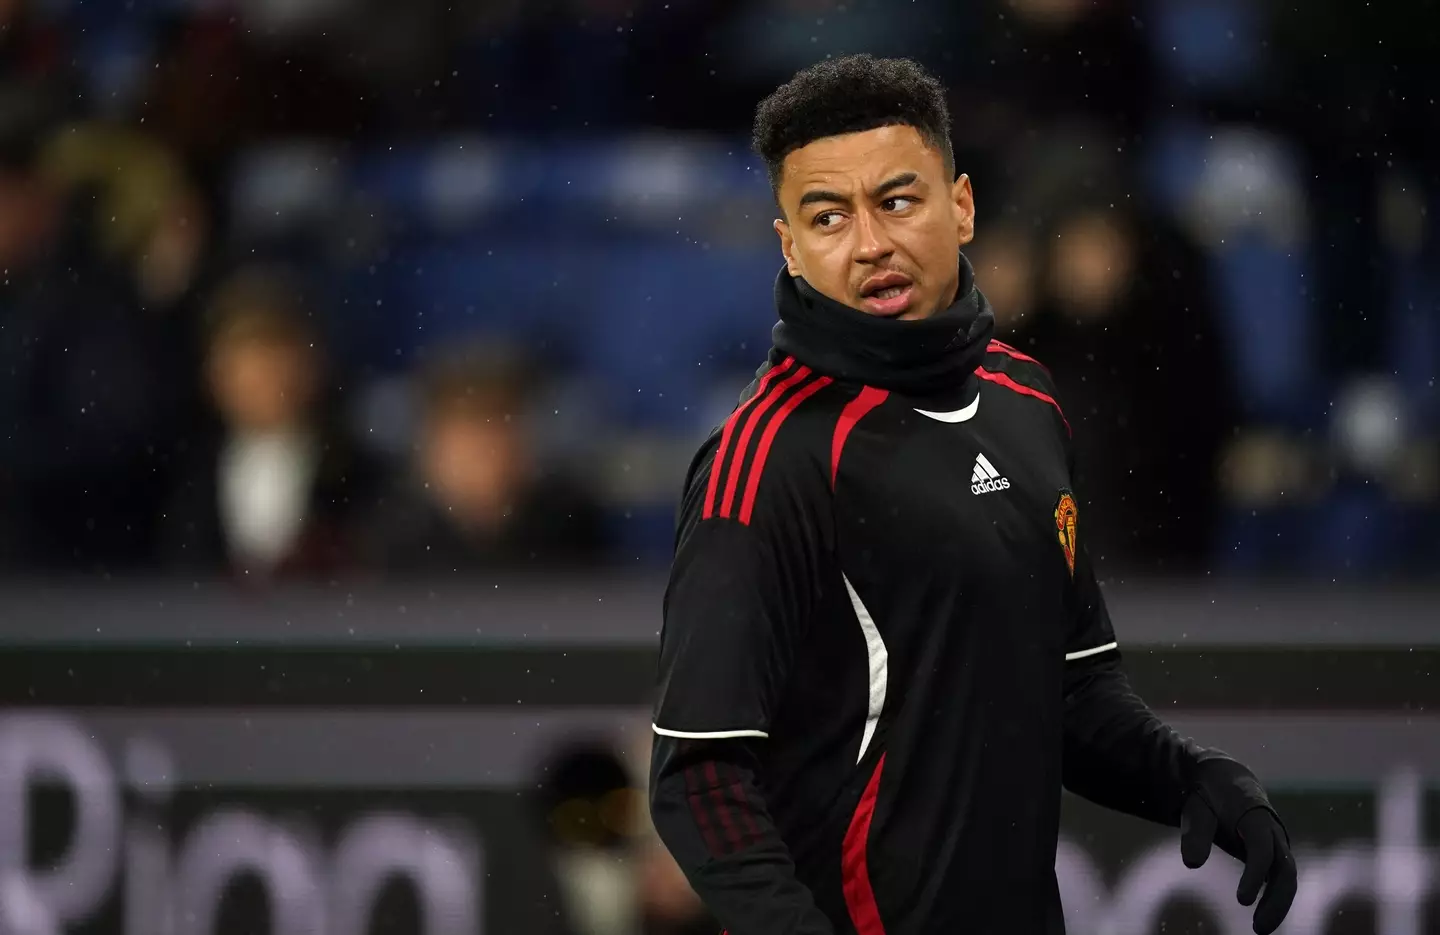 Lingard was on the bench for most of last season. Image: Alamy